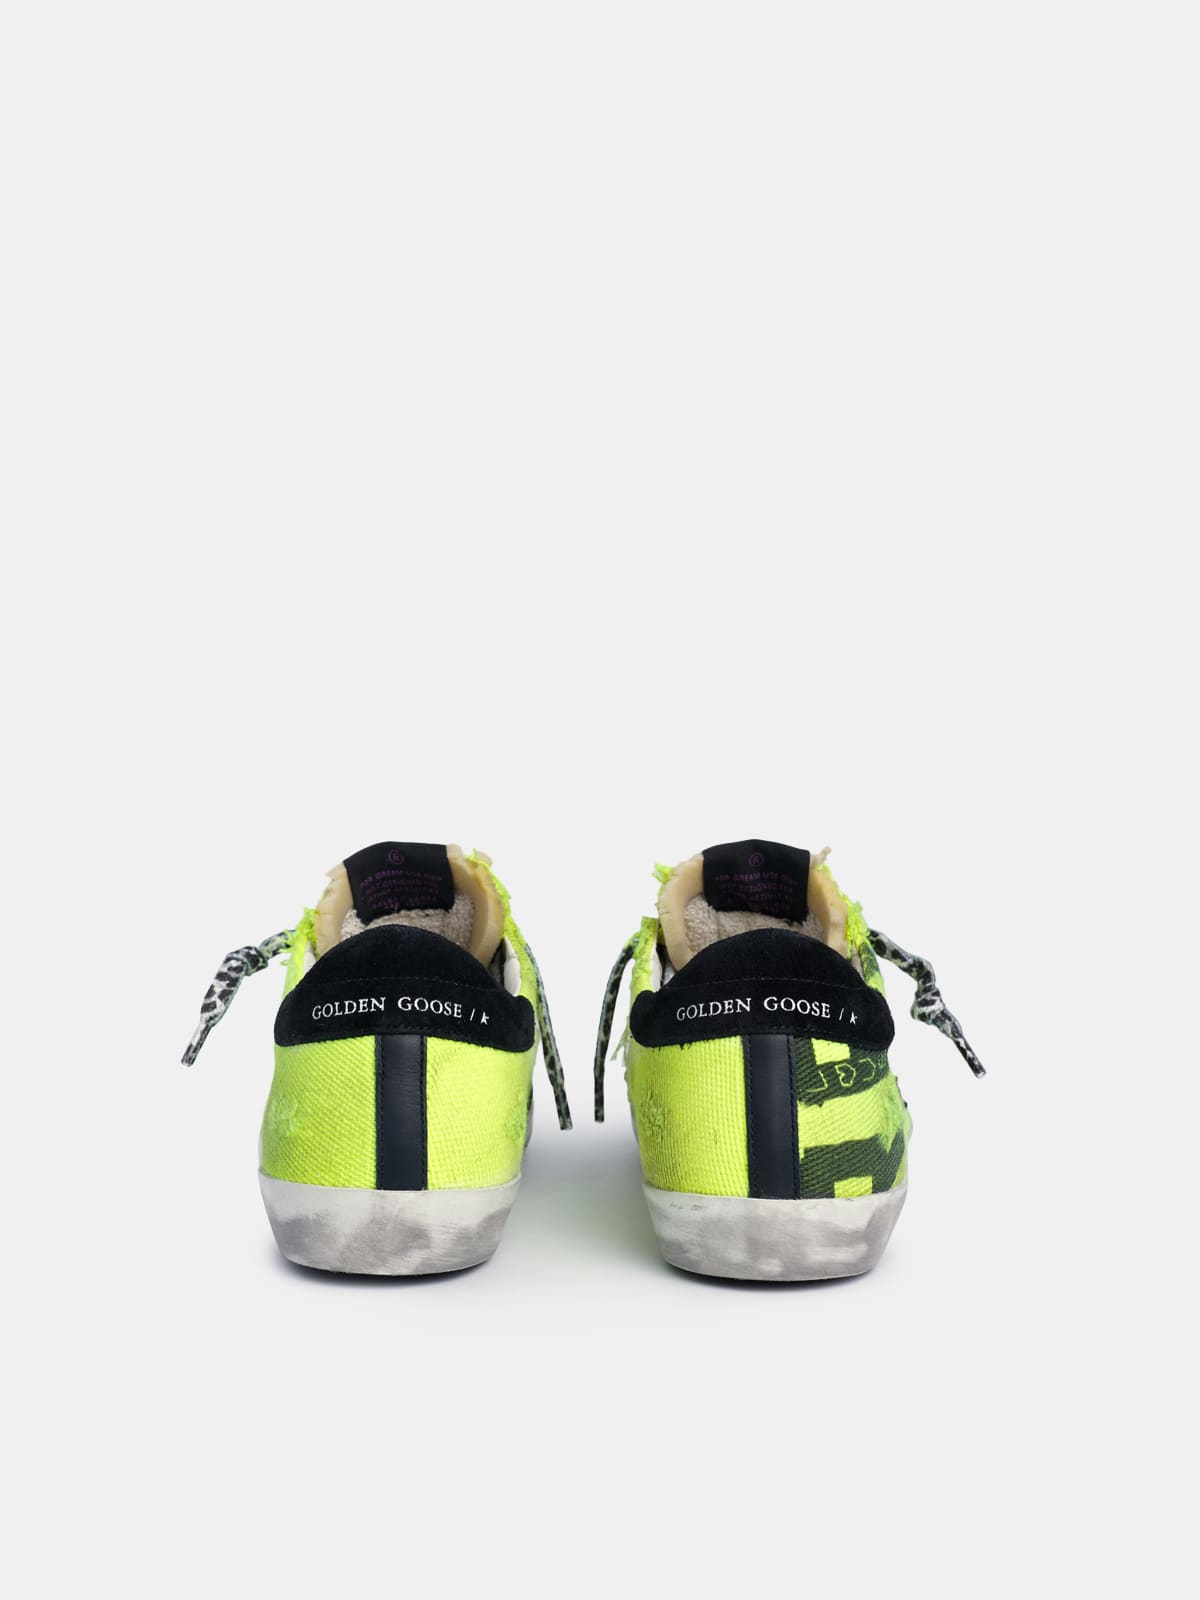 Golden Goose - Super-Star sneakers in fluorescent yellow cotton with contrasting black decorations in 